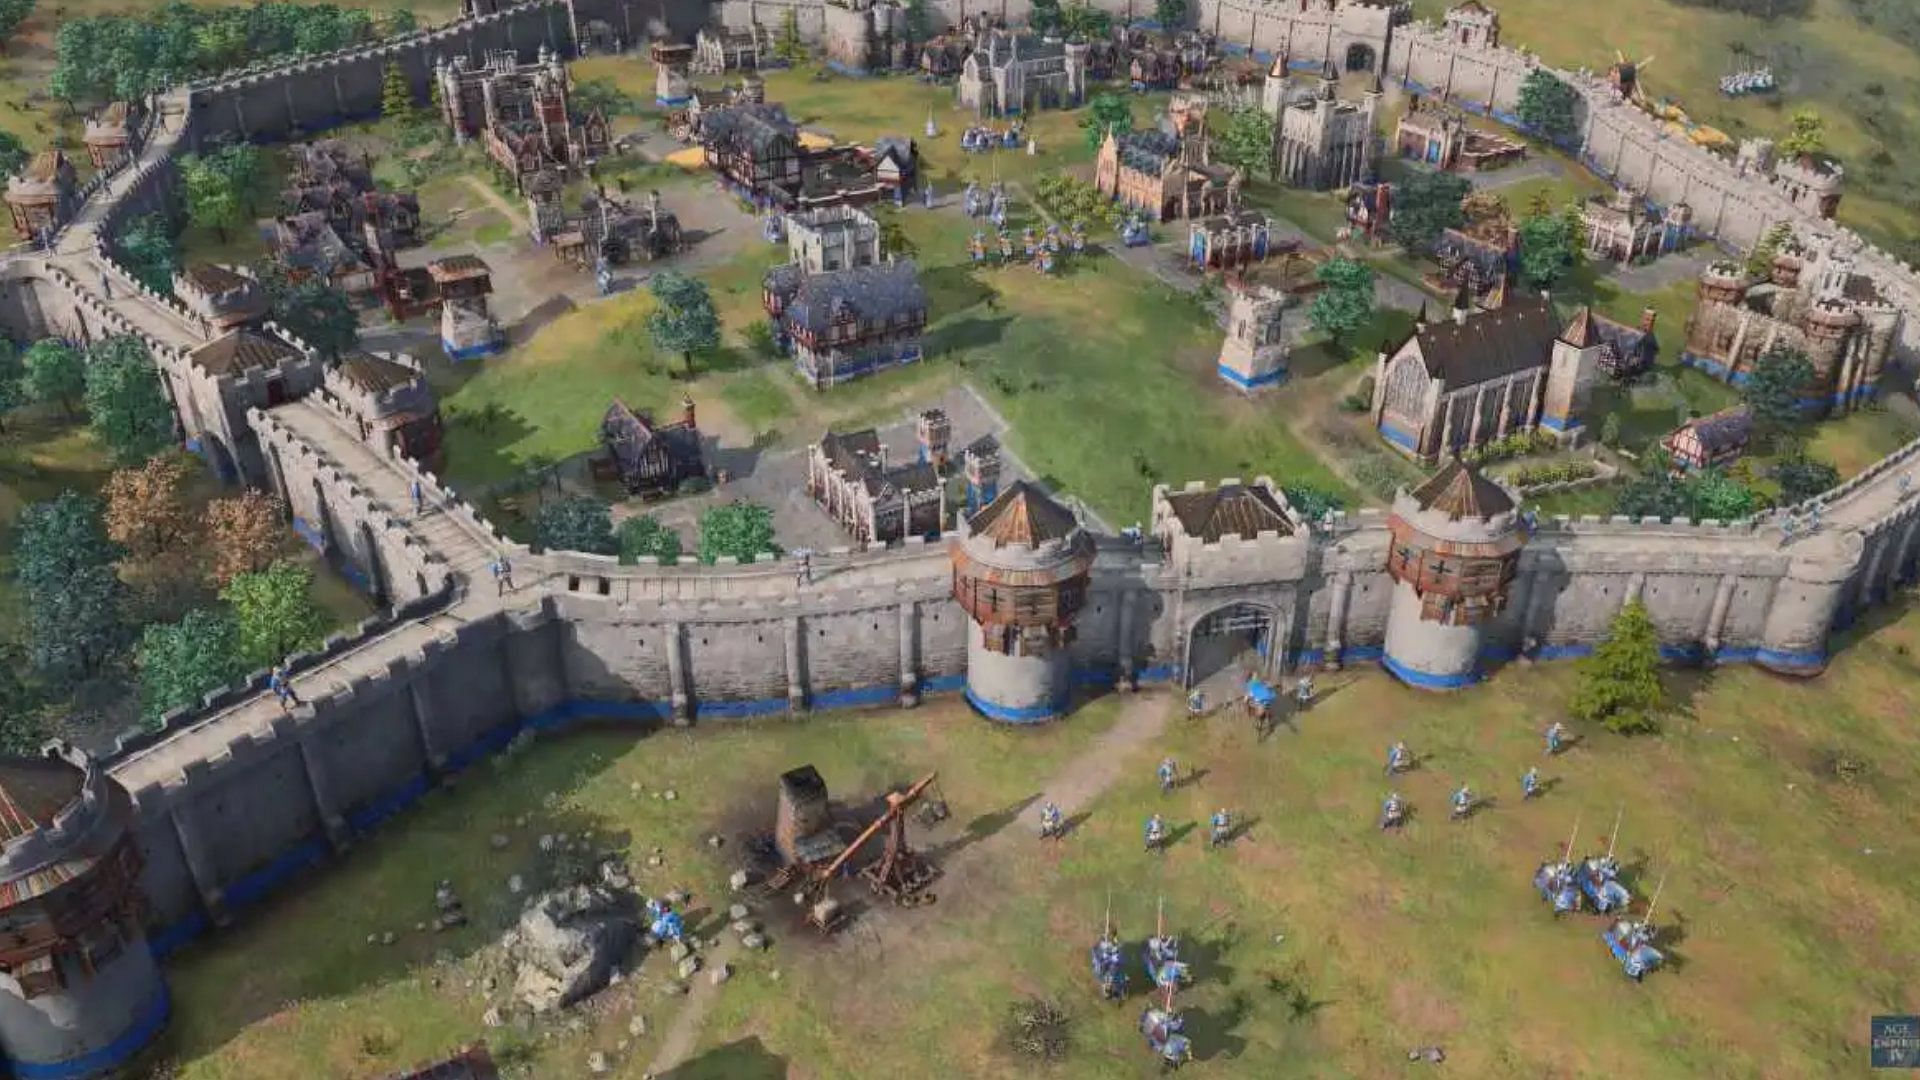 Age of Empires IV develops a medieval plot with kings, queens, and bloody wars (Image via Relic Entertainment)